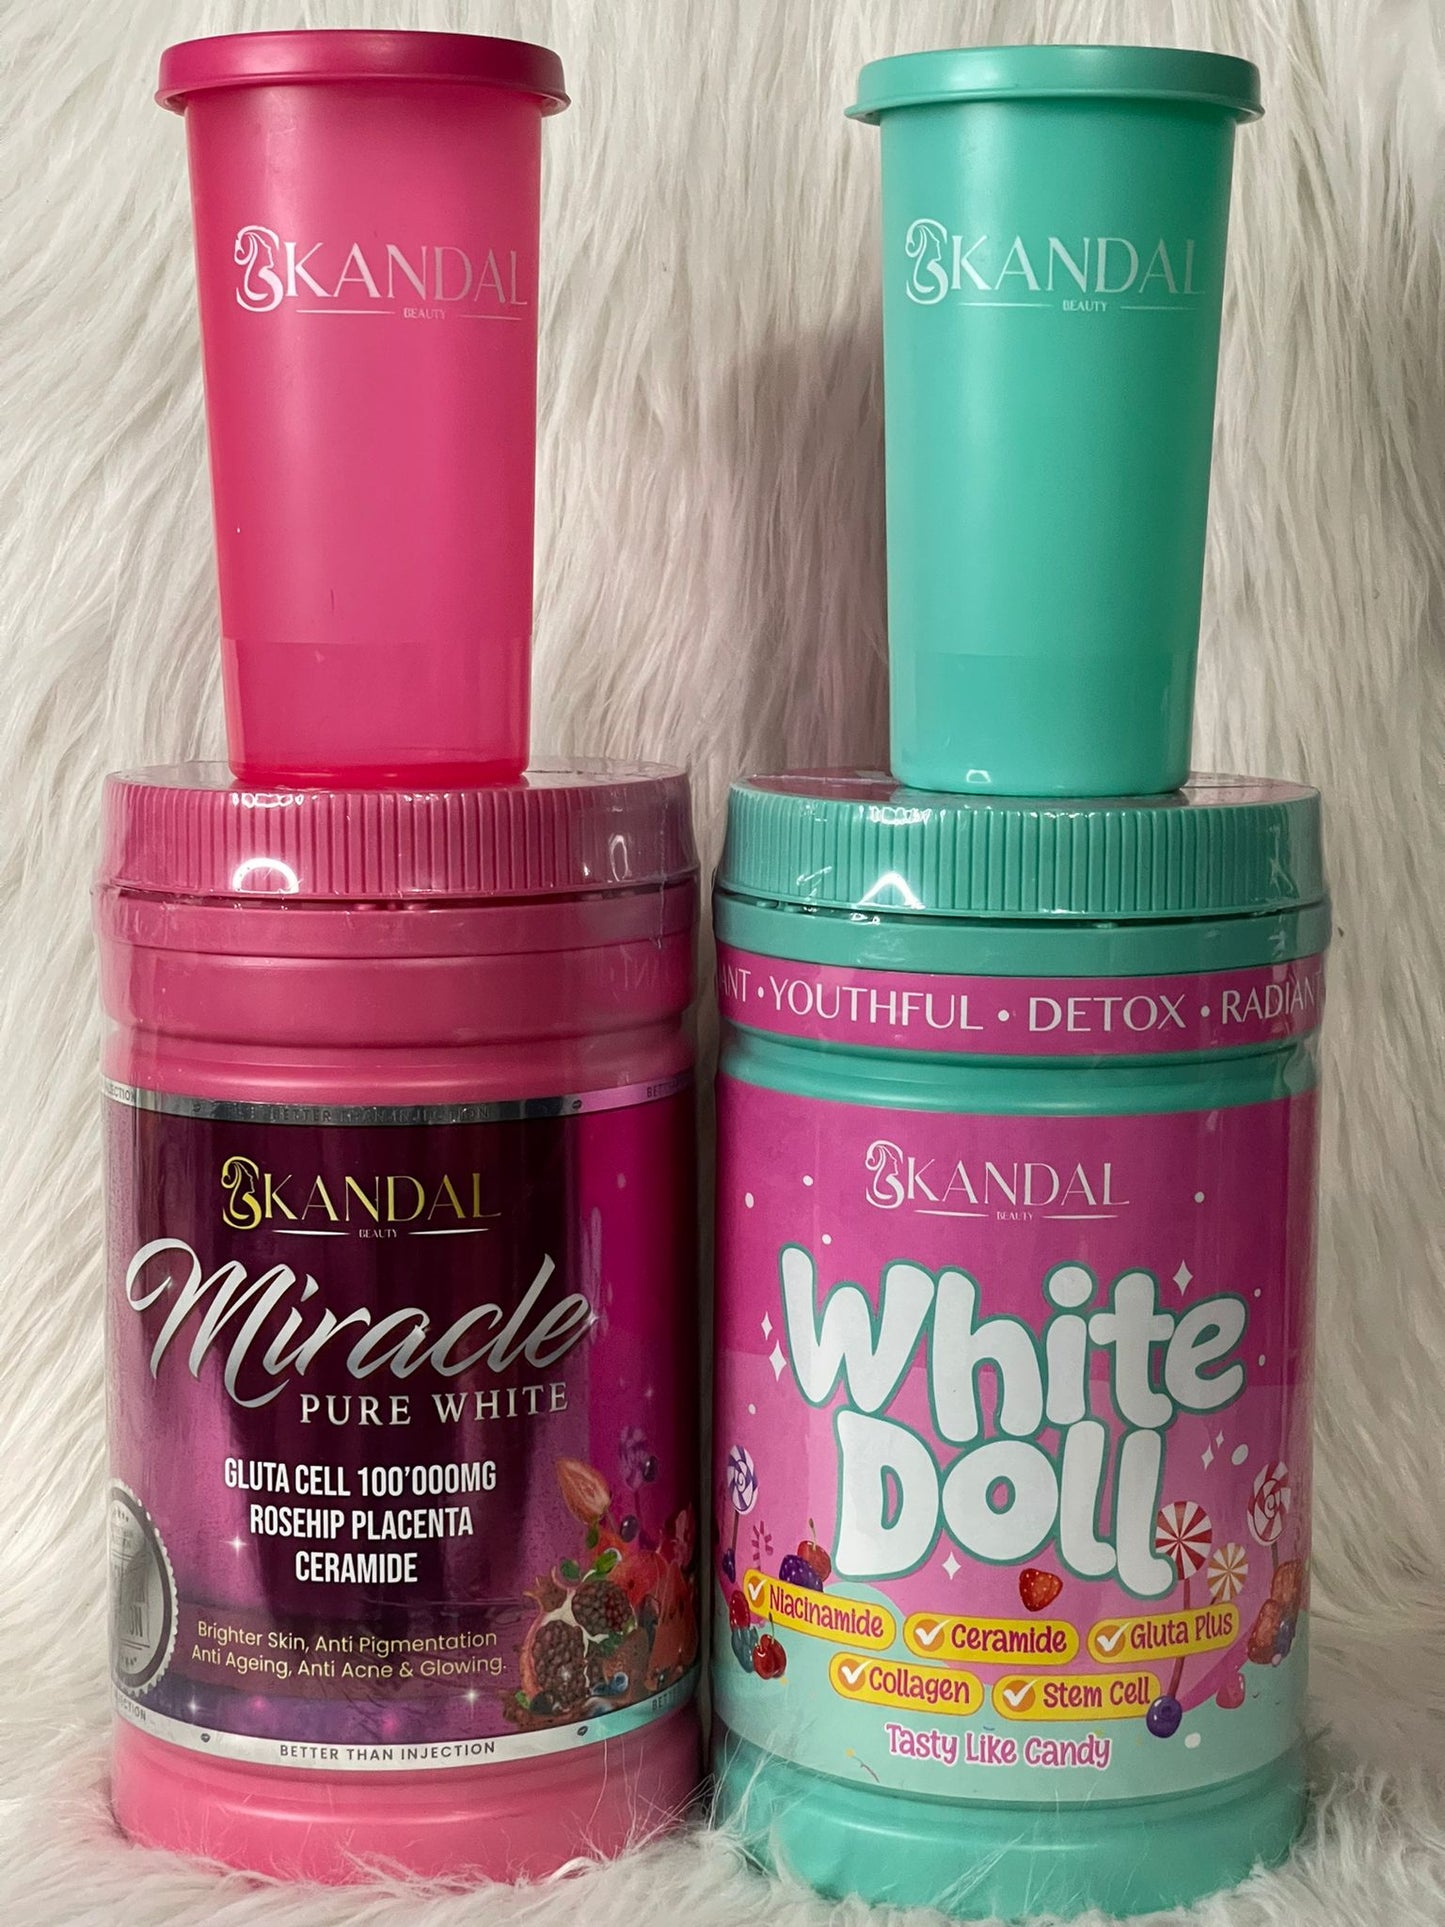 SKANDAL DUO MIRACLE PURE WHITE ET WHITE DOLL COLLAGÈNE GLUTATHIONE ULTRA BLANCHISSANT ANTI IMPERFECTION